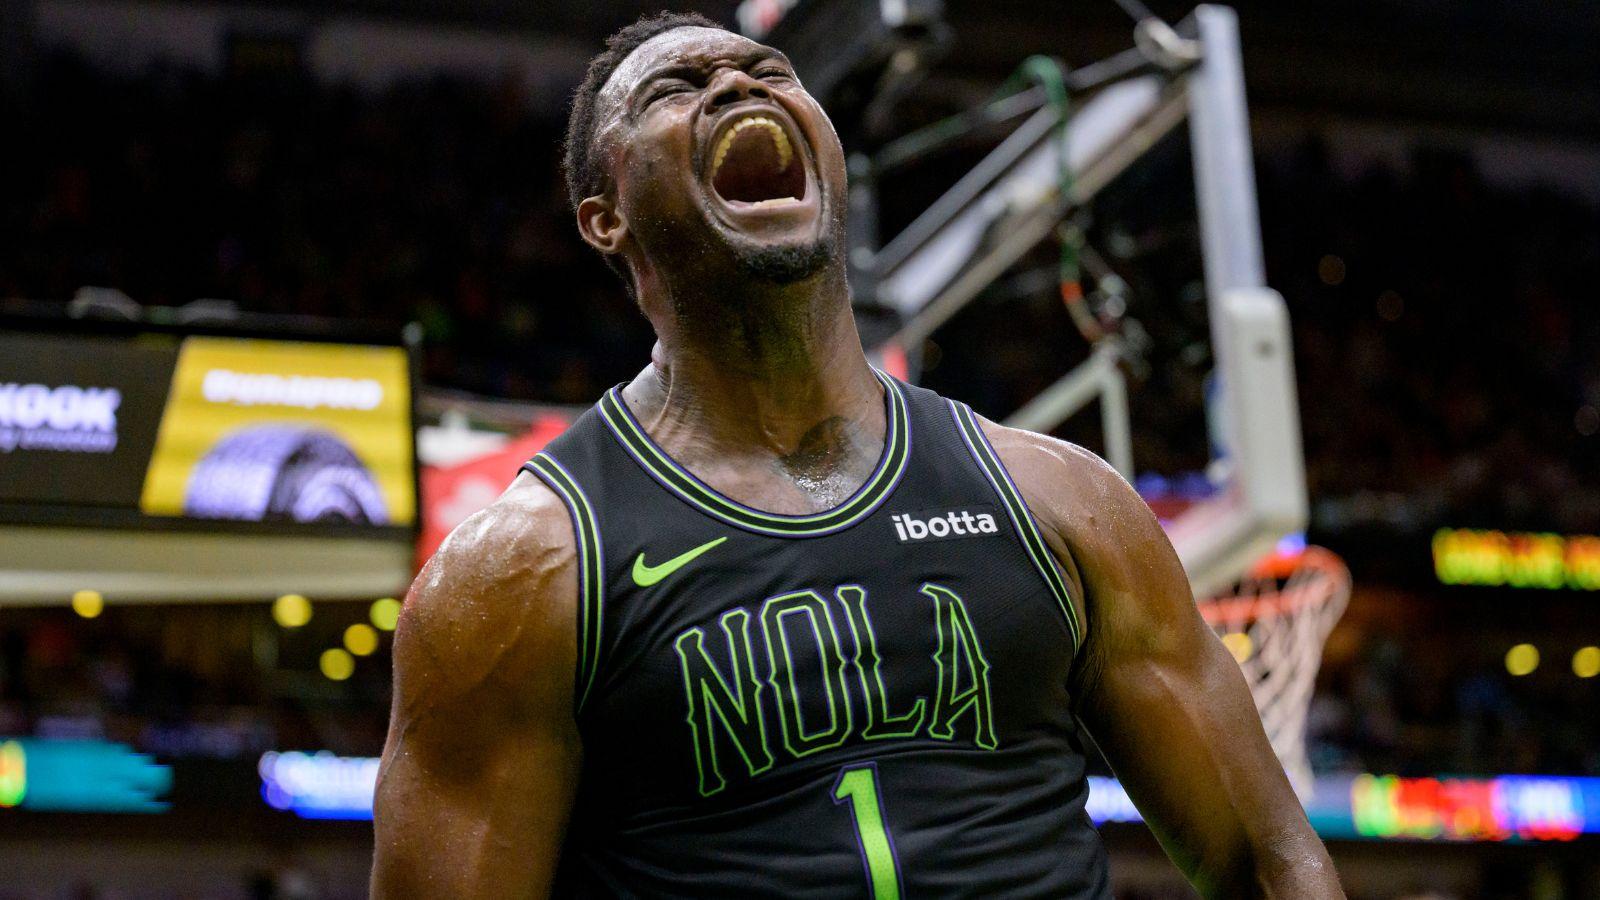 Zion Williamson celebrates as a member of the New Orleans Pelicans.